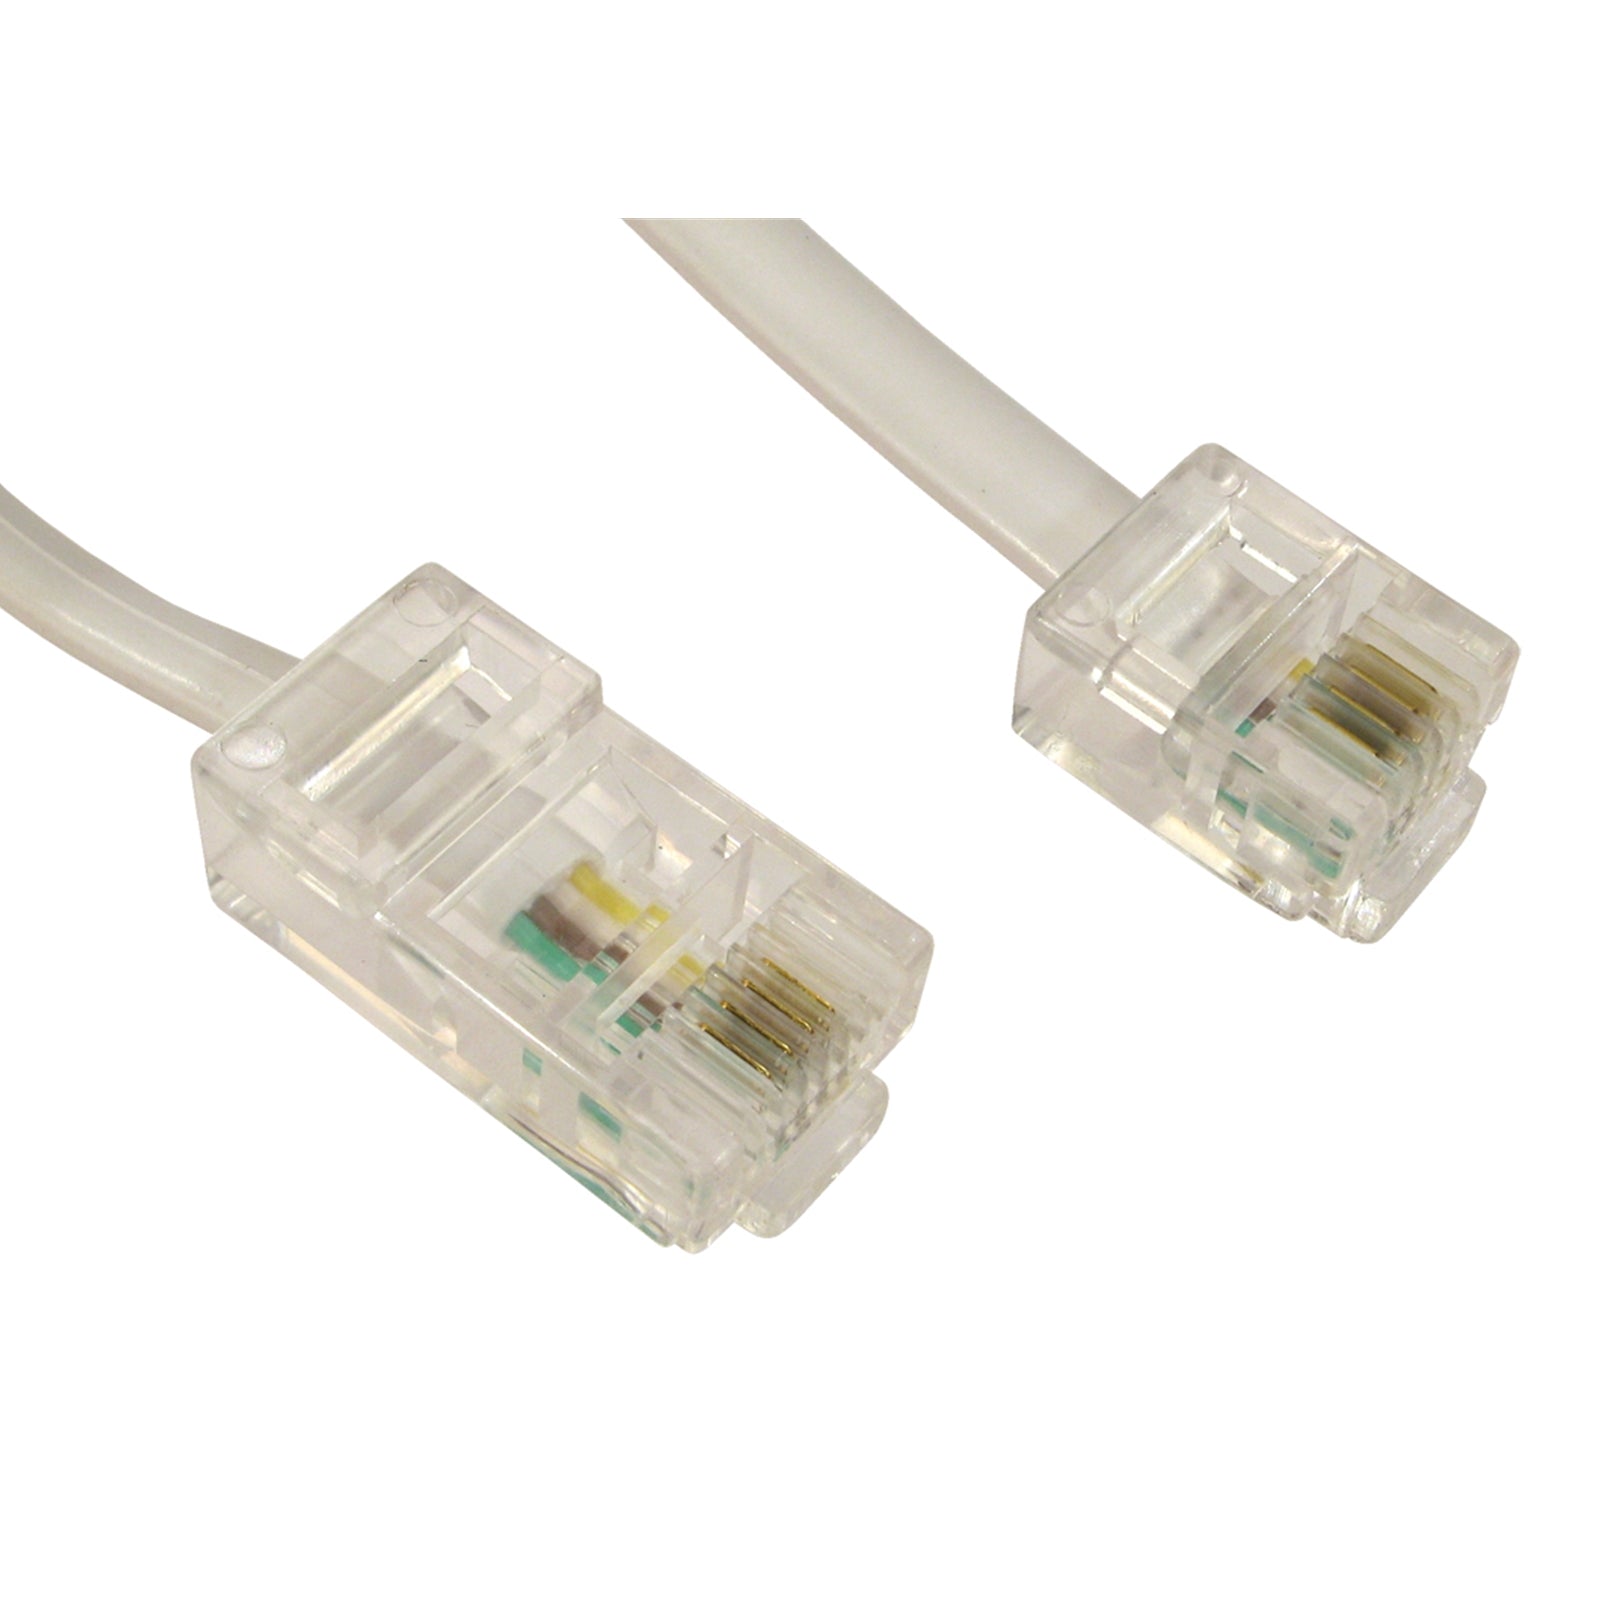 Telephone Extension & ADSL Modem cables